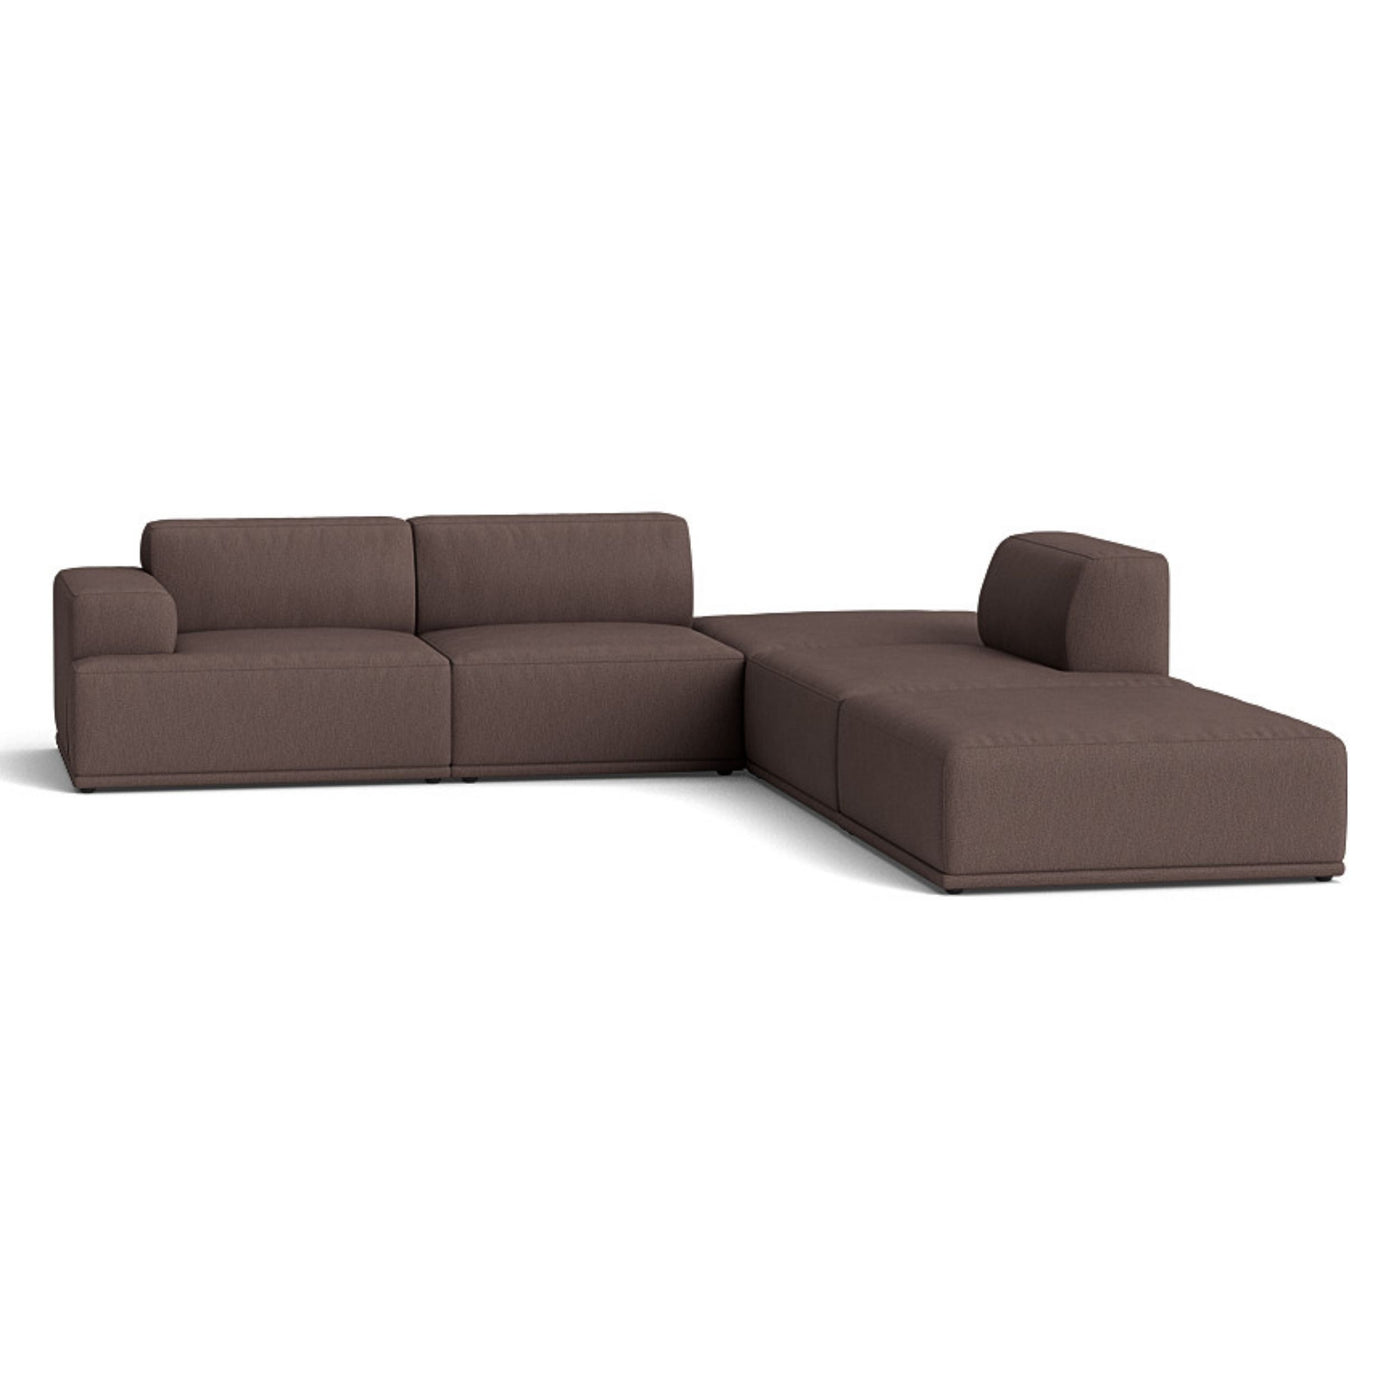 Muuto Connect Soft Modular Corner Sofa, configuration 3. made-to-order from someday designs. #colour_clay-6-red-brown